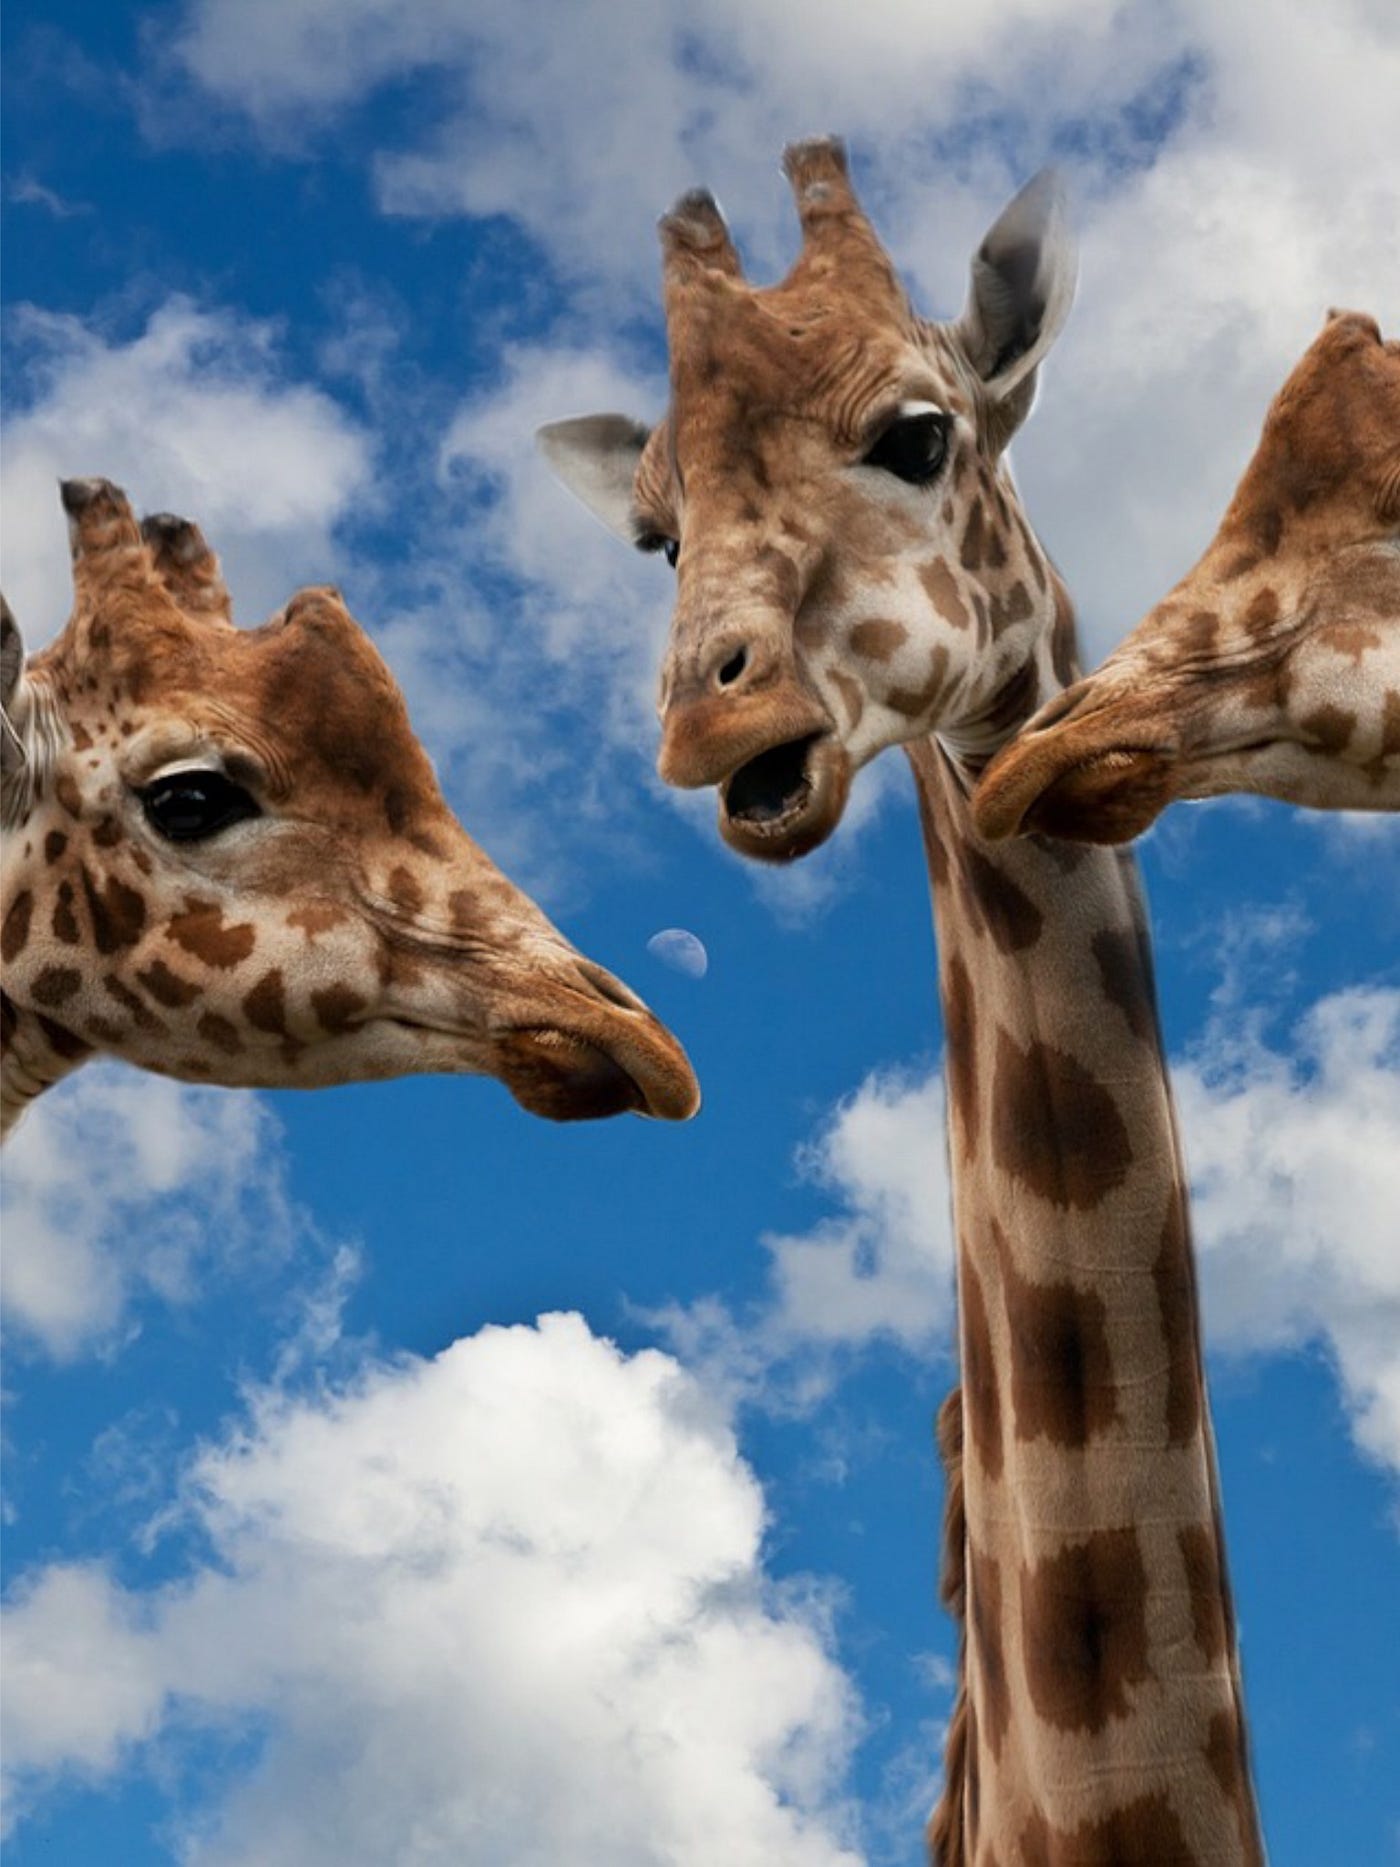 Color photo of three giraffes up close with blue sky, scattered clouds background.